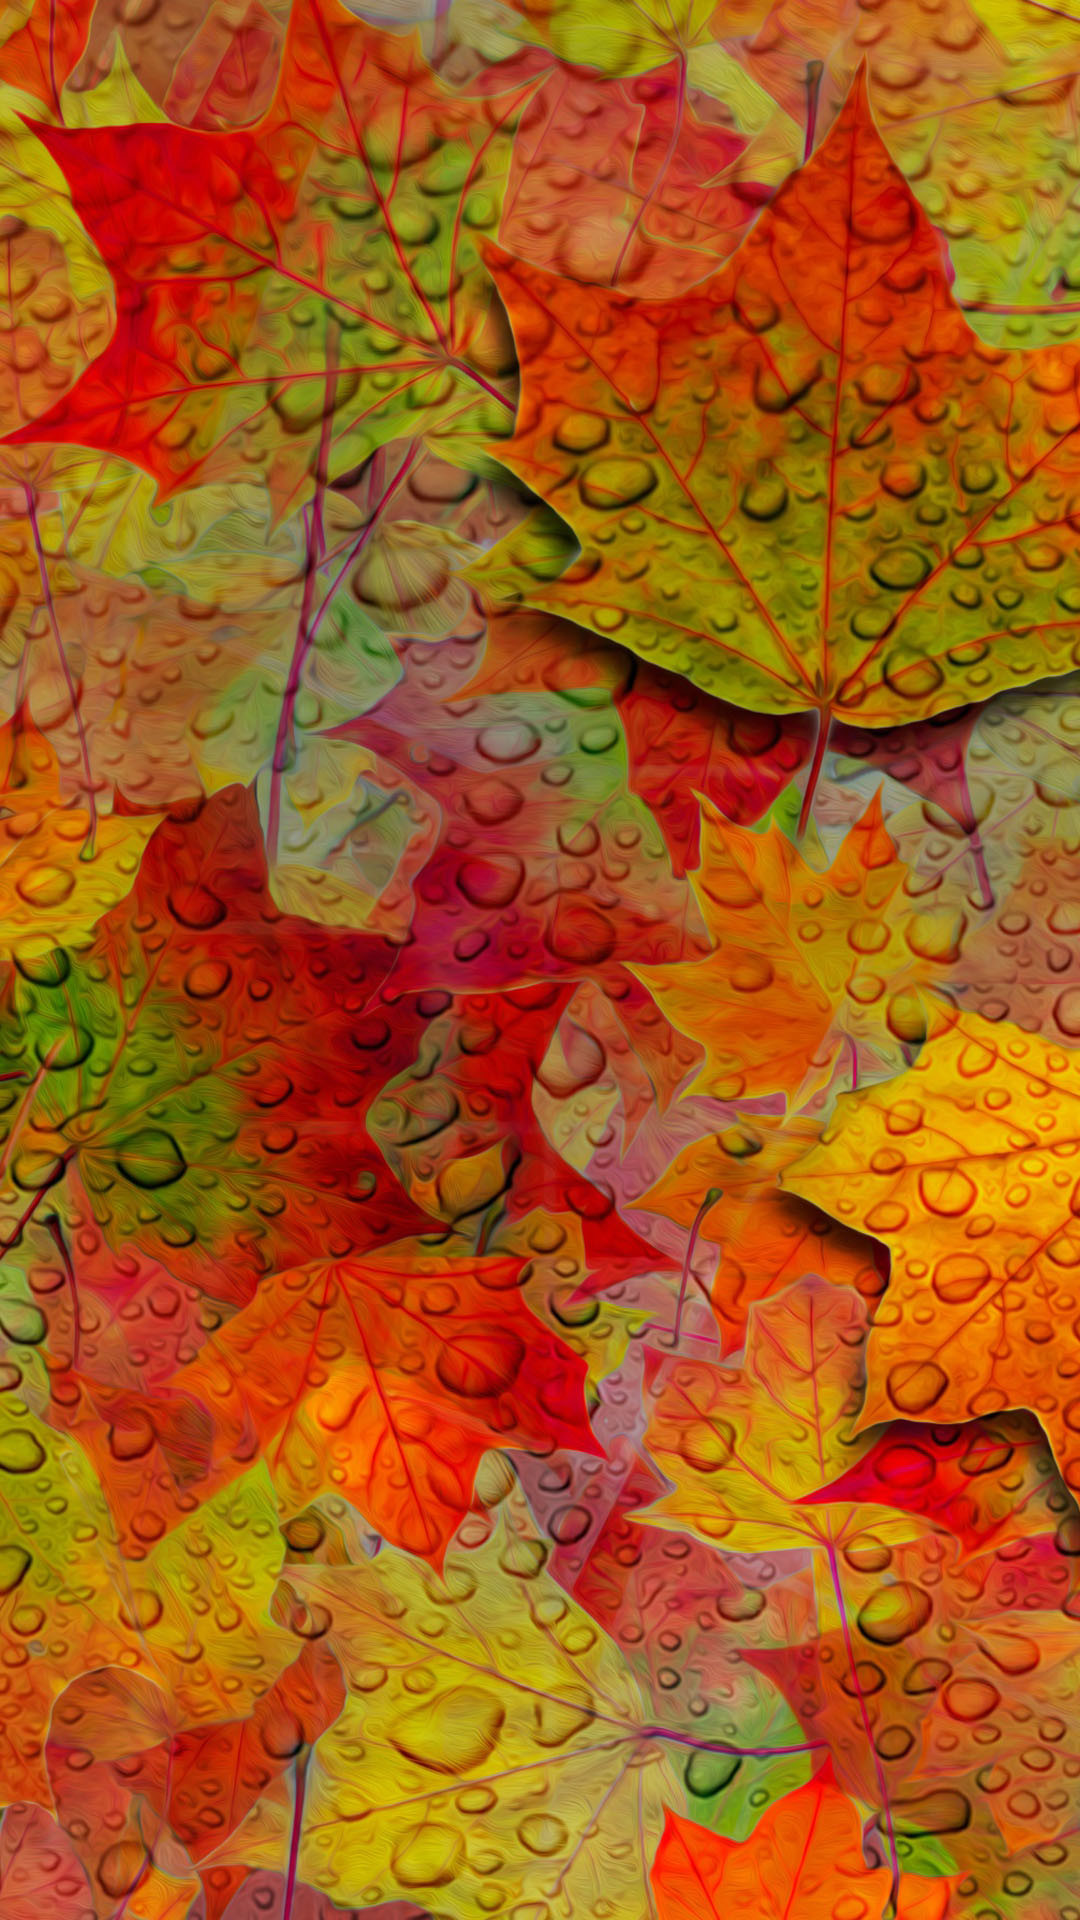 1080x1920 fall leaves hd wallpapers for your iphone 6 iphone 6 plus and iphone .